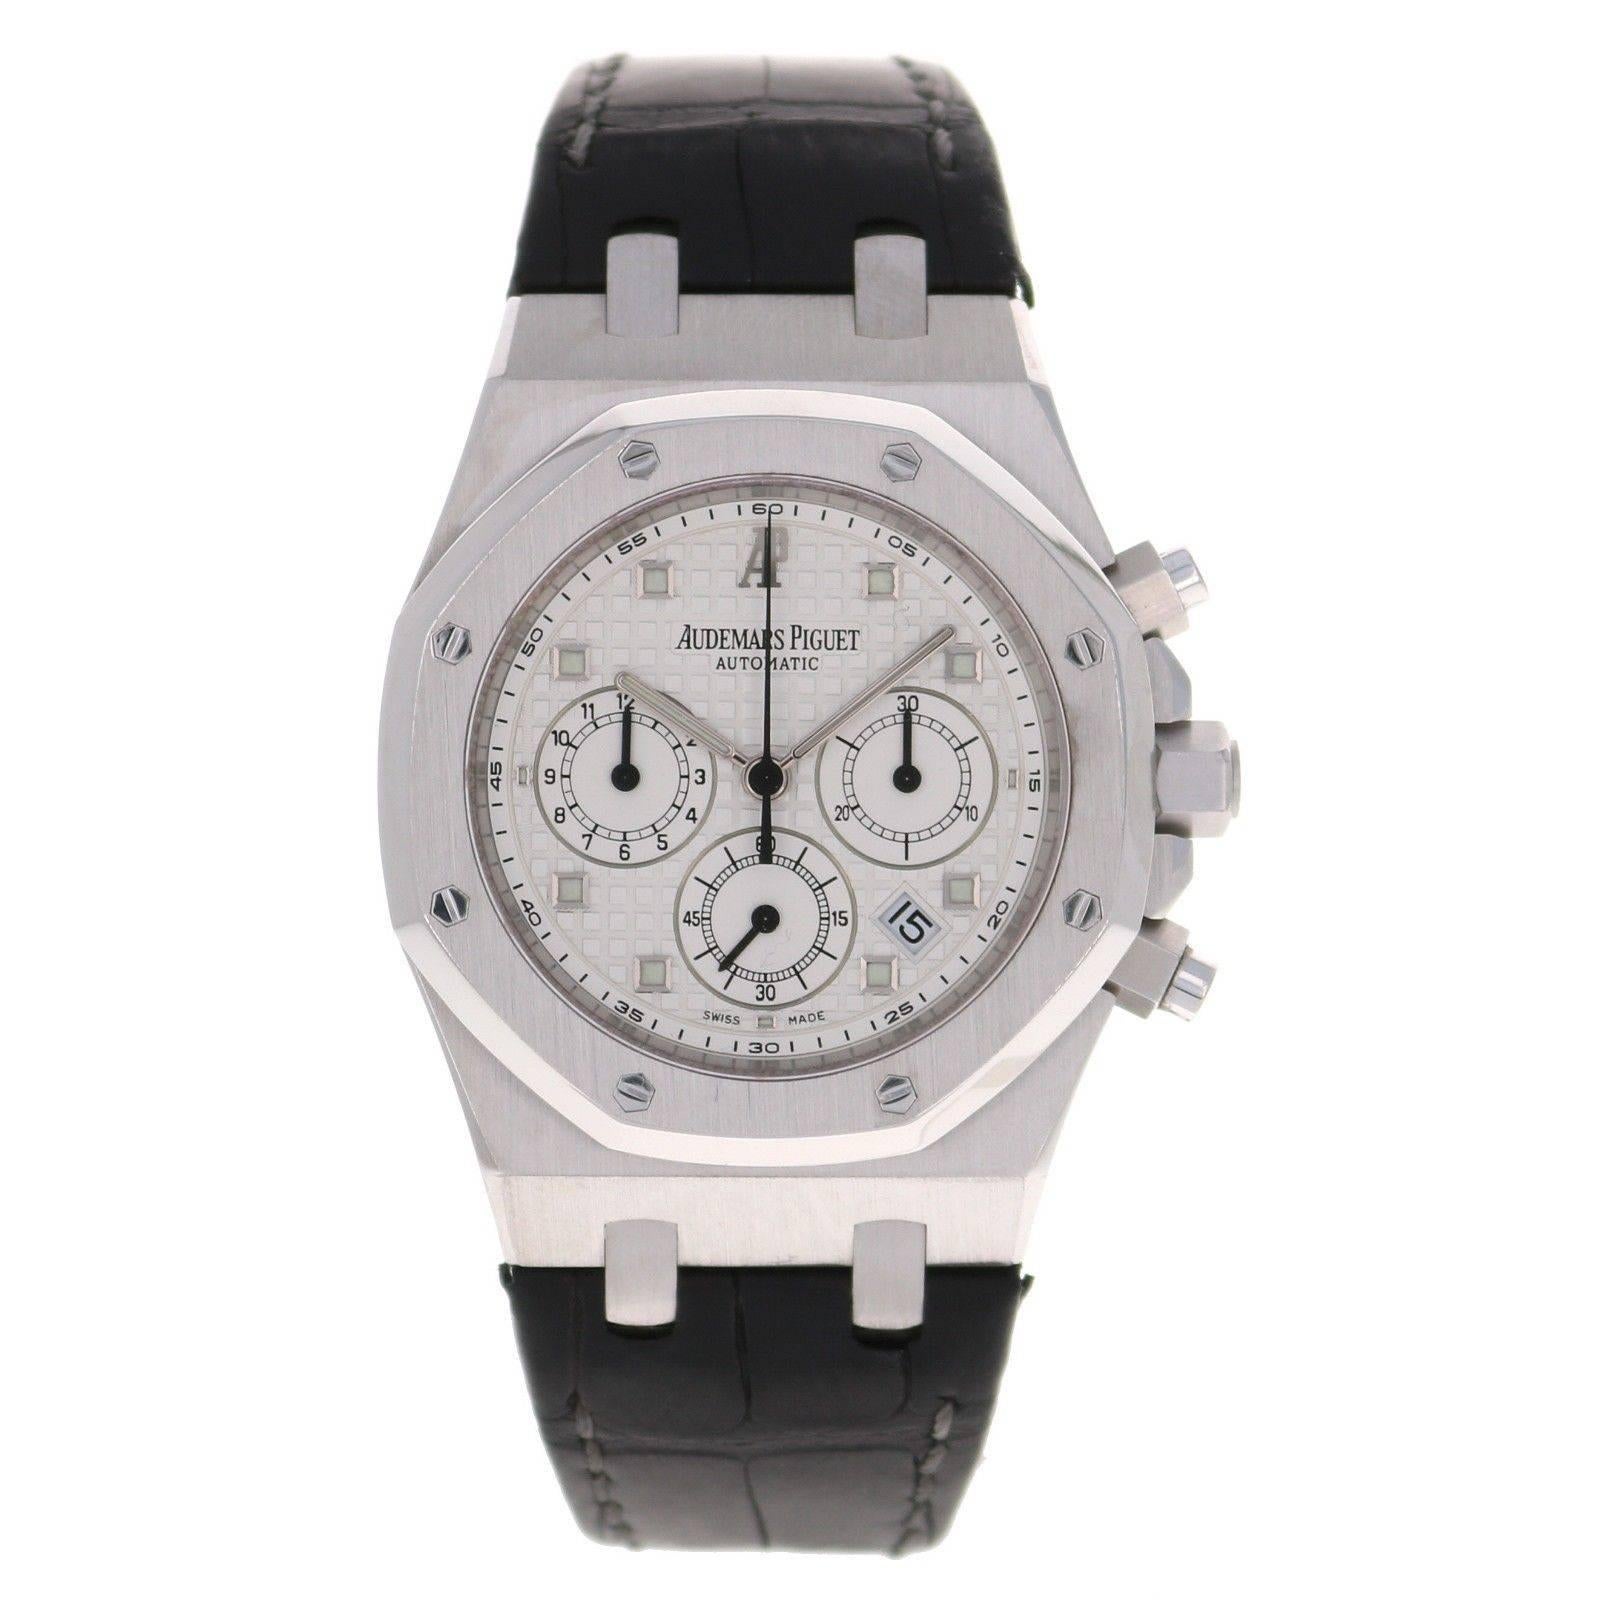 Brand Name  Audemars Piguet
Style Number  26022BC.OO.D002CR.01
Also Called  26022BCOOD002CR01
Series  Royal Oak Chronograph
Gender  Men's
Case Material  18K White Gold
Dial Color  Silvered
Movement  Automatic
Engine  Cal. 2385
Functions  Hours,